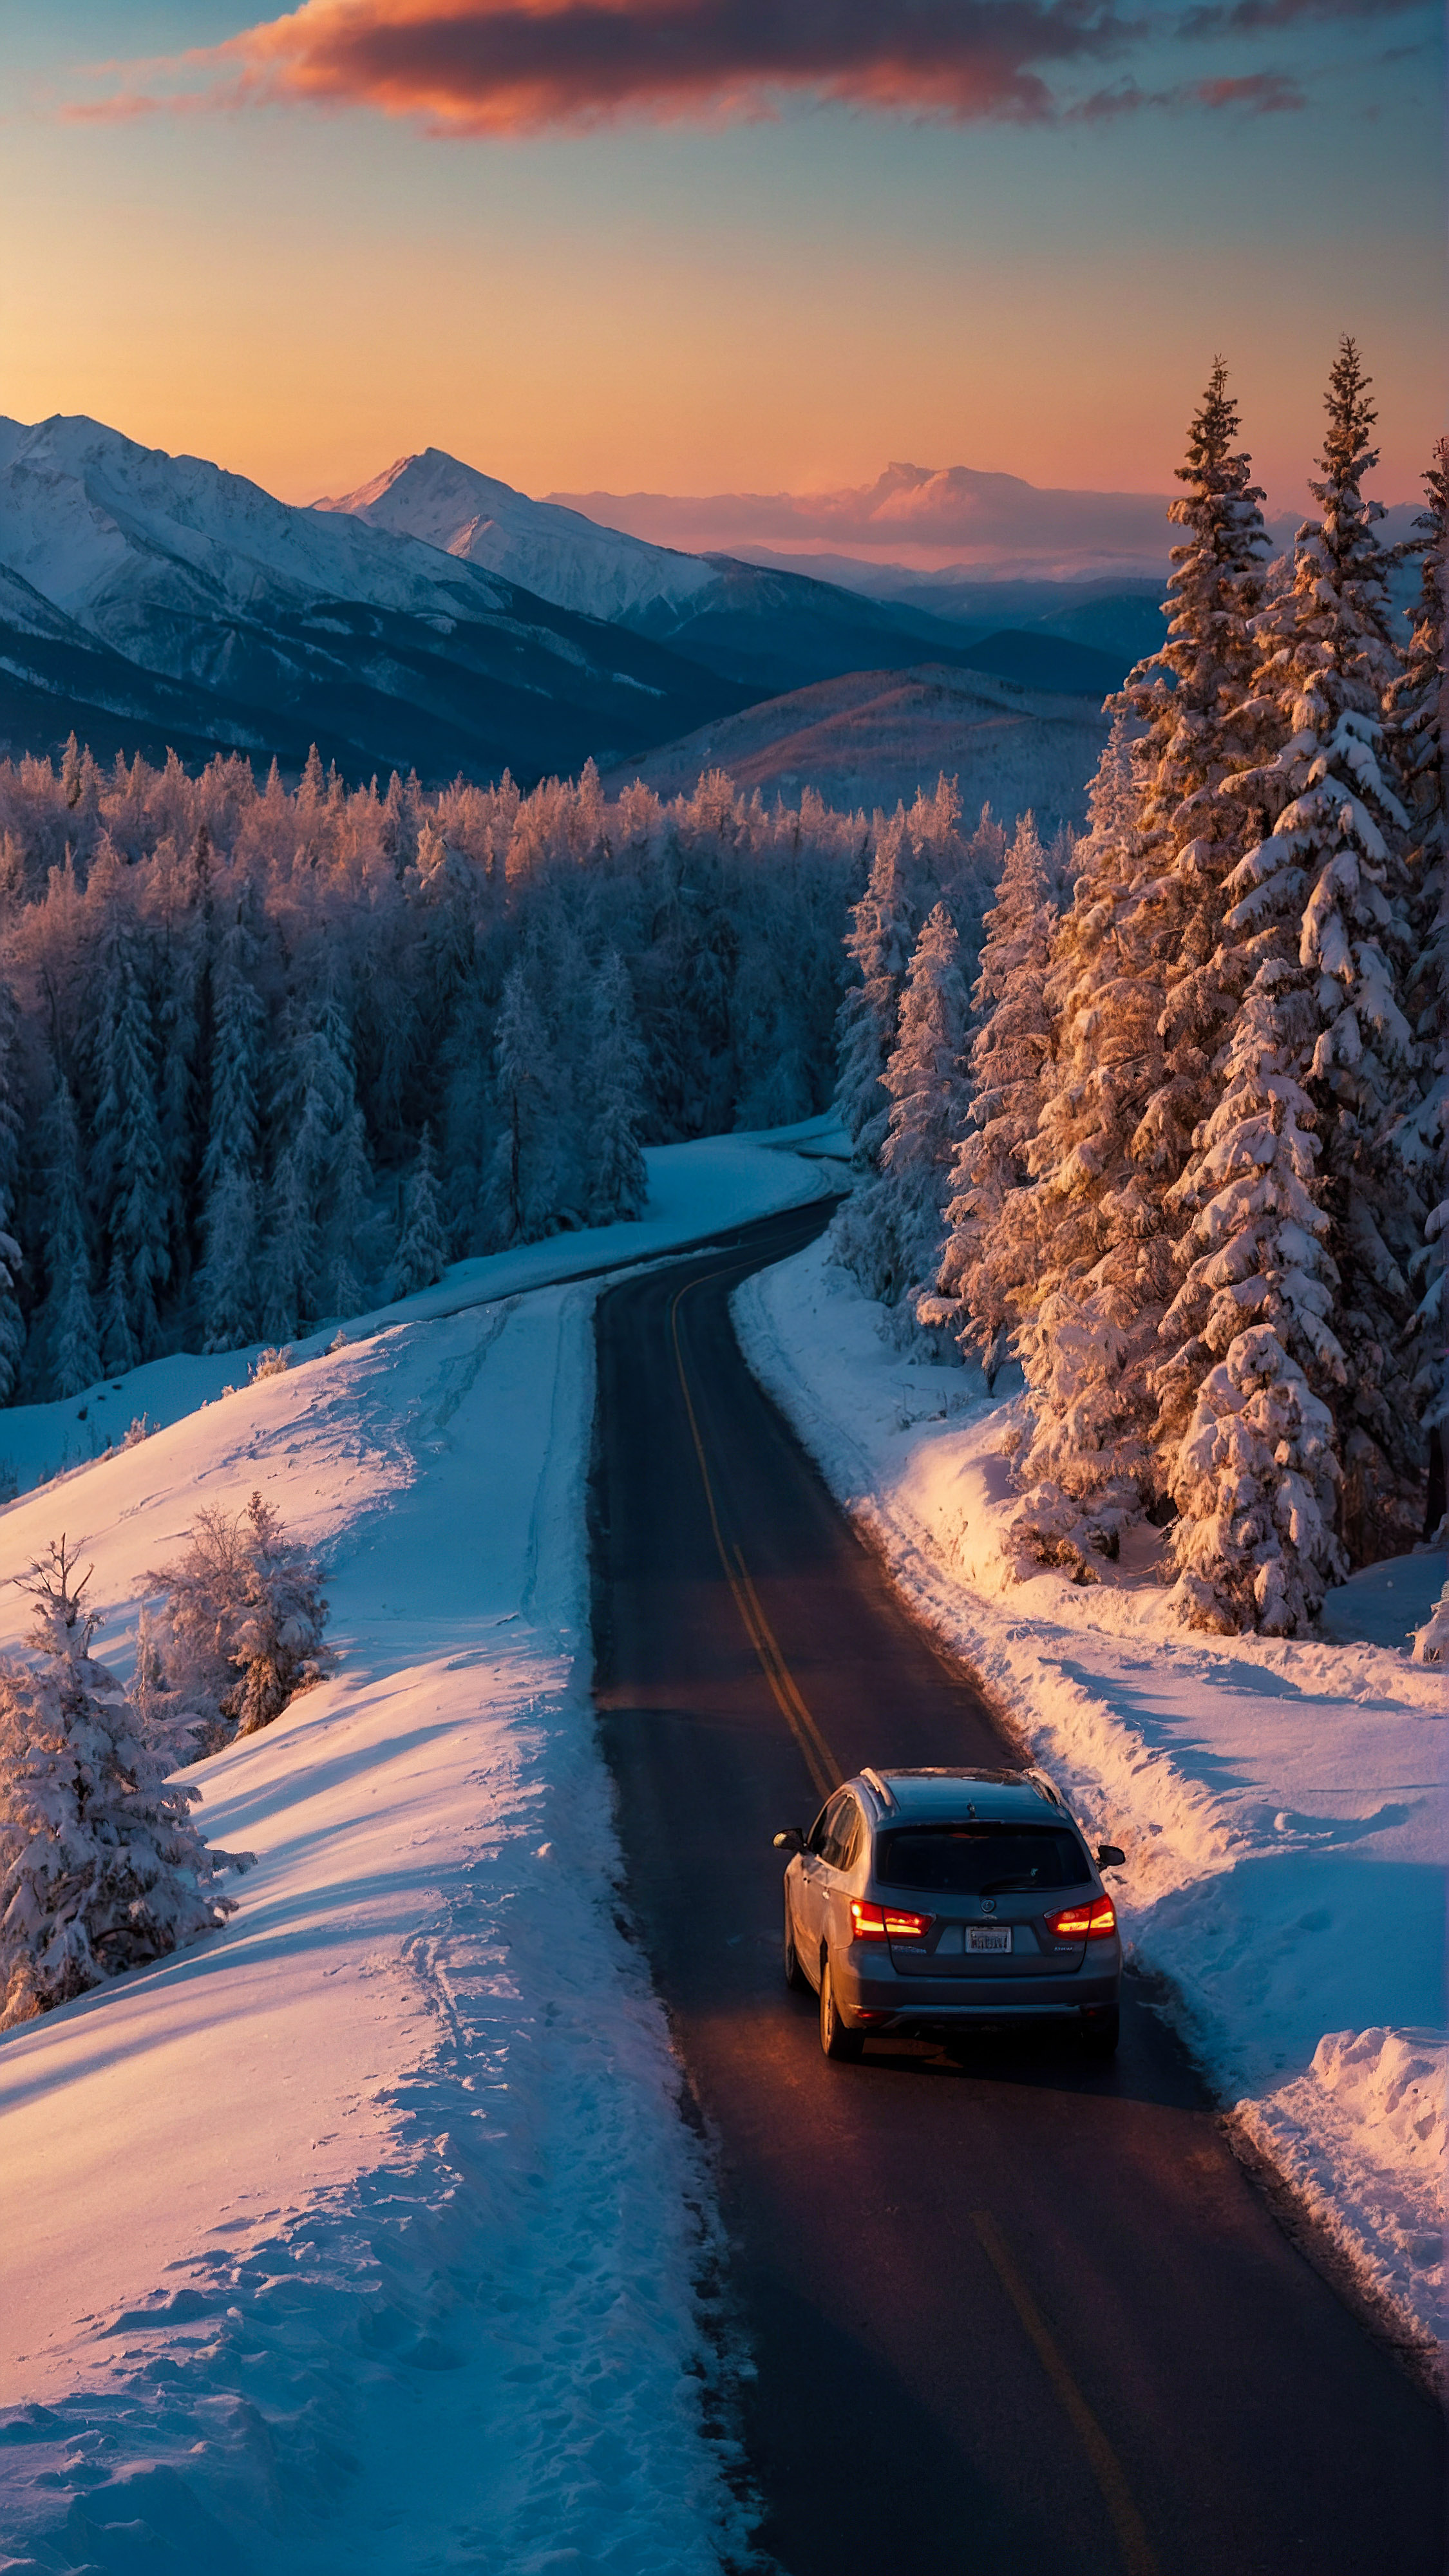 Download this cool aesthetic iPhone wallpaper, a vibrant winter landscape at dusk, featuring a winding road with a traveling car, surrounded by snow-covered trees and mountains under the glow of the setting sun.